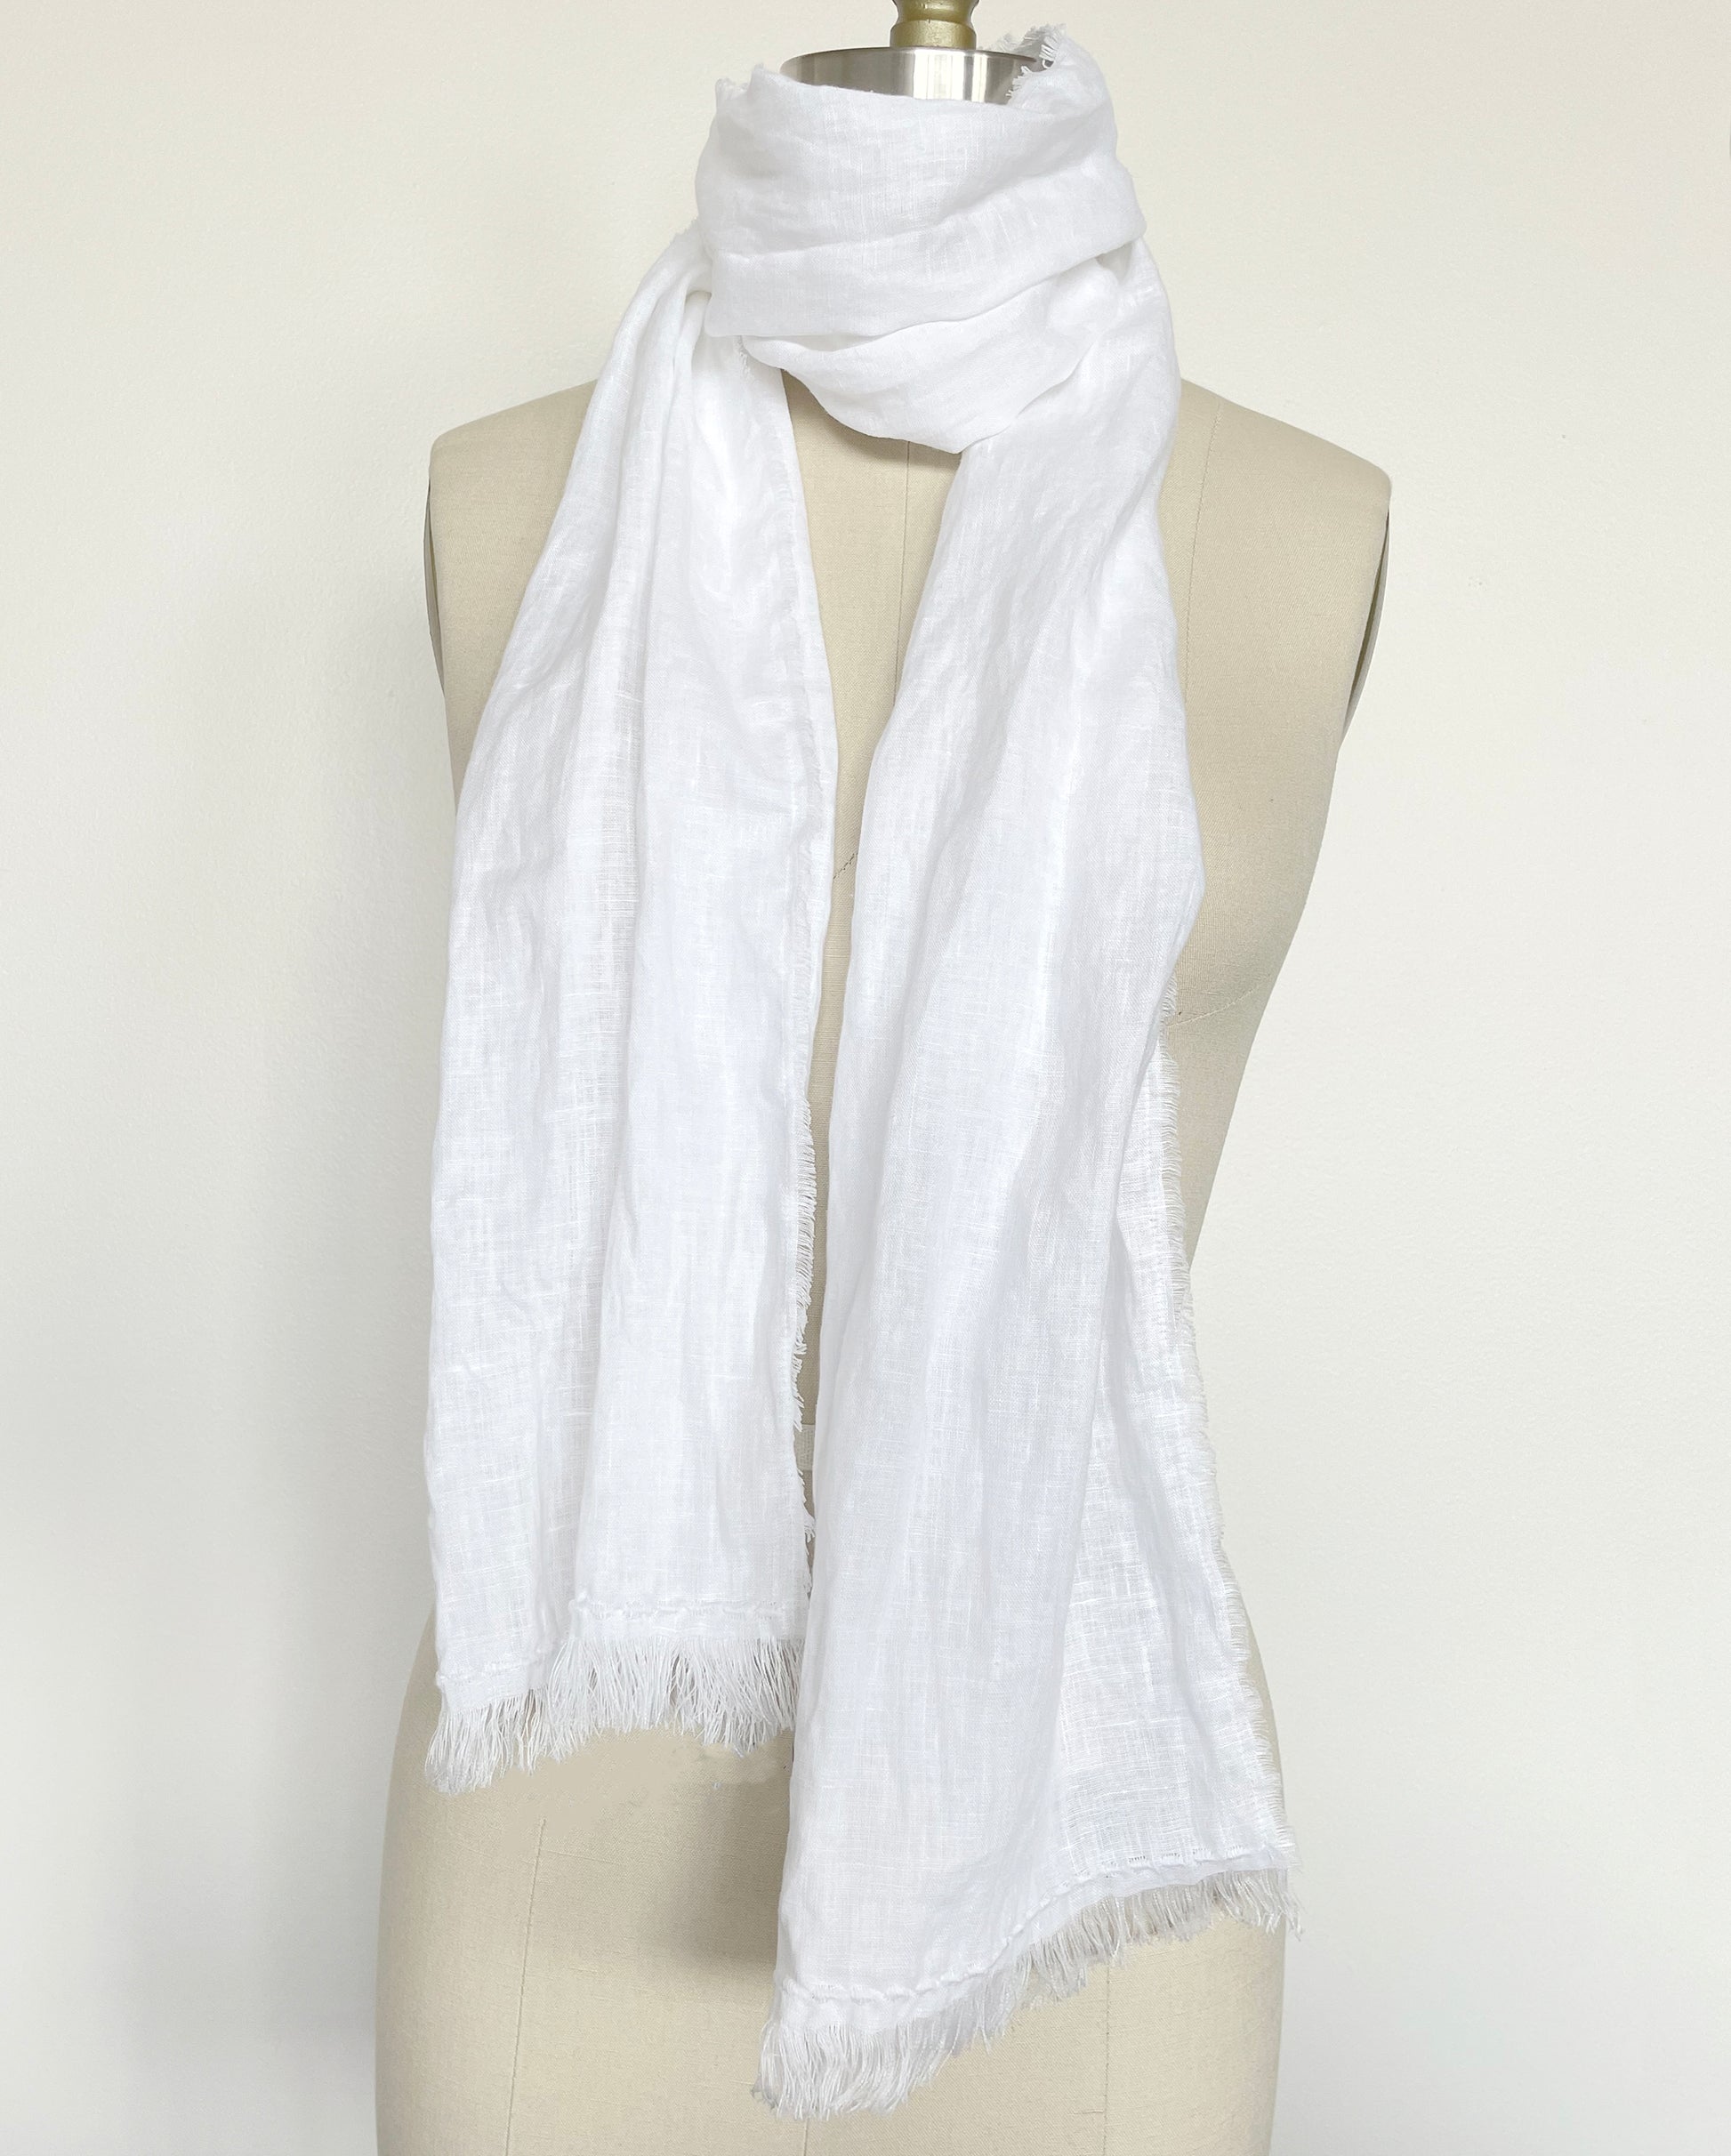 Solid White Neck Scarf